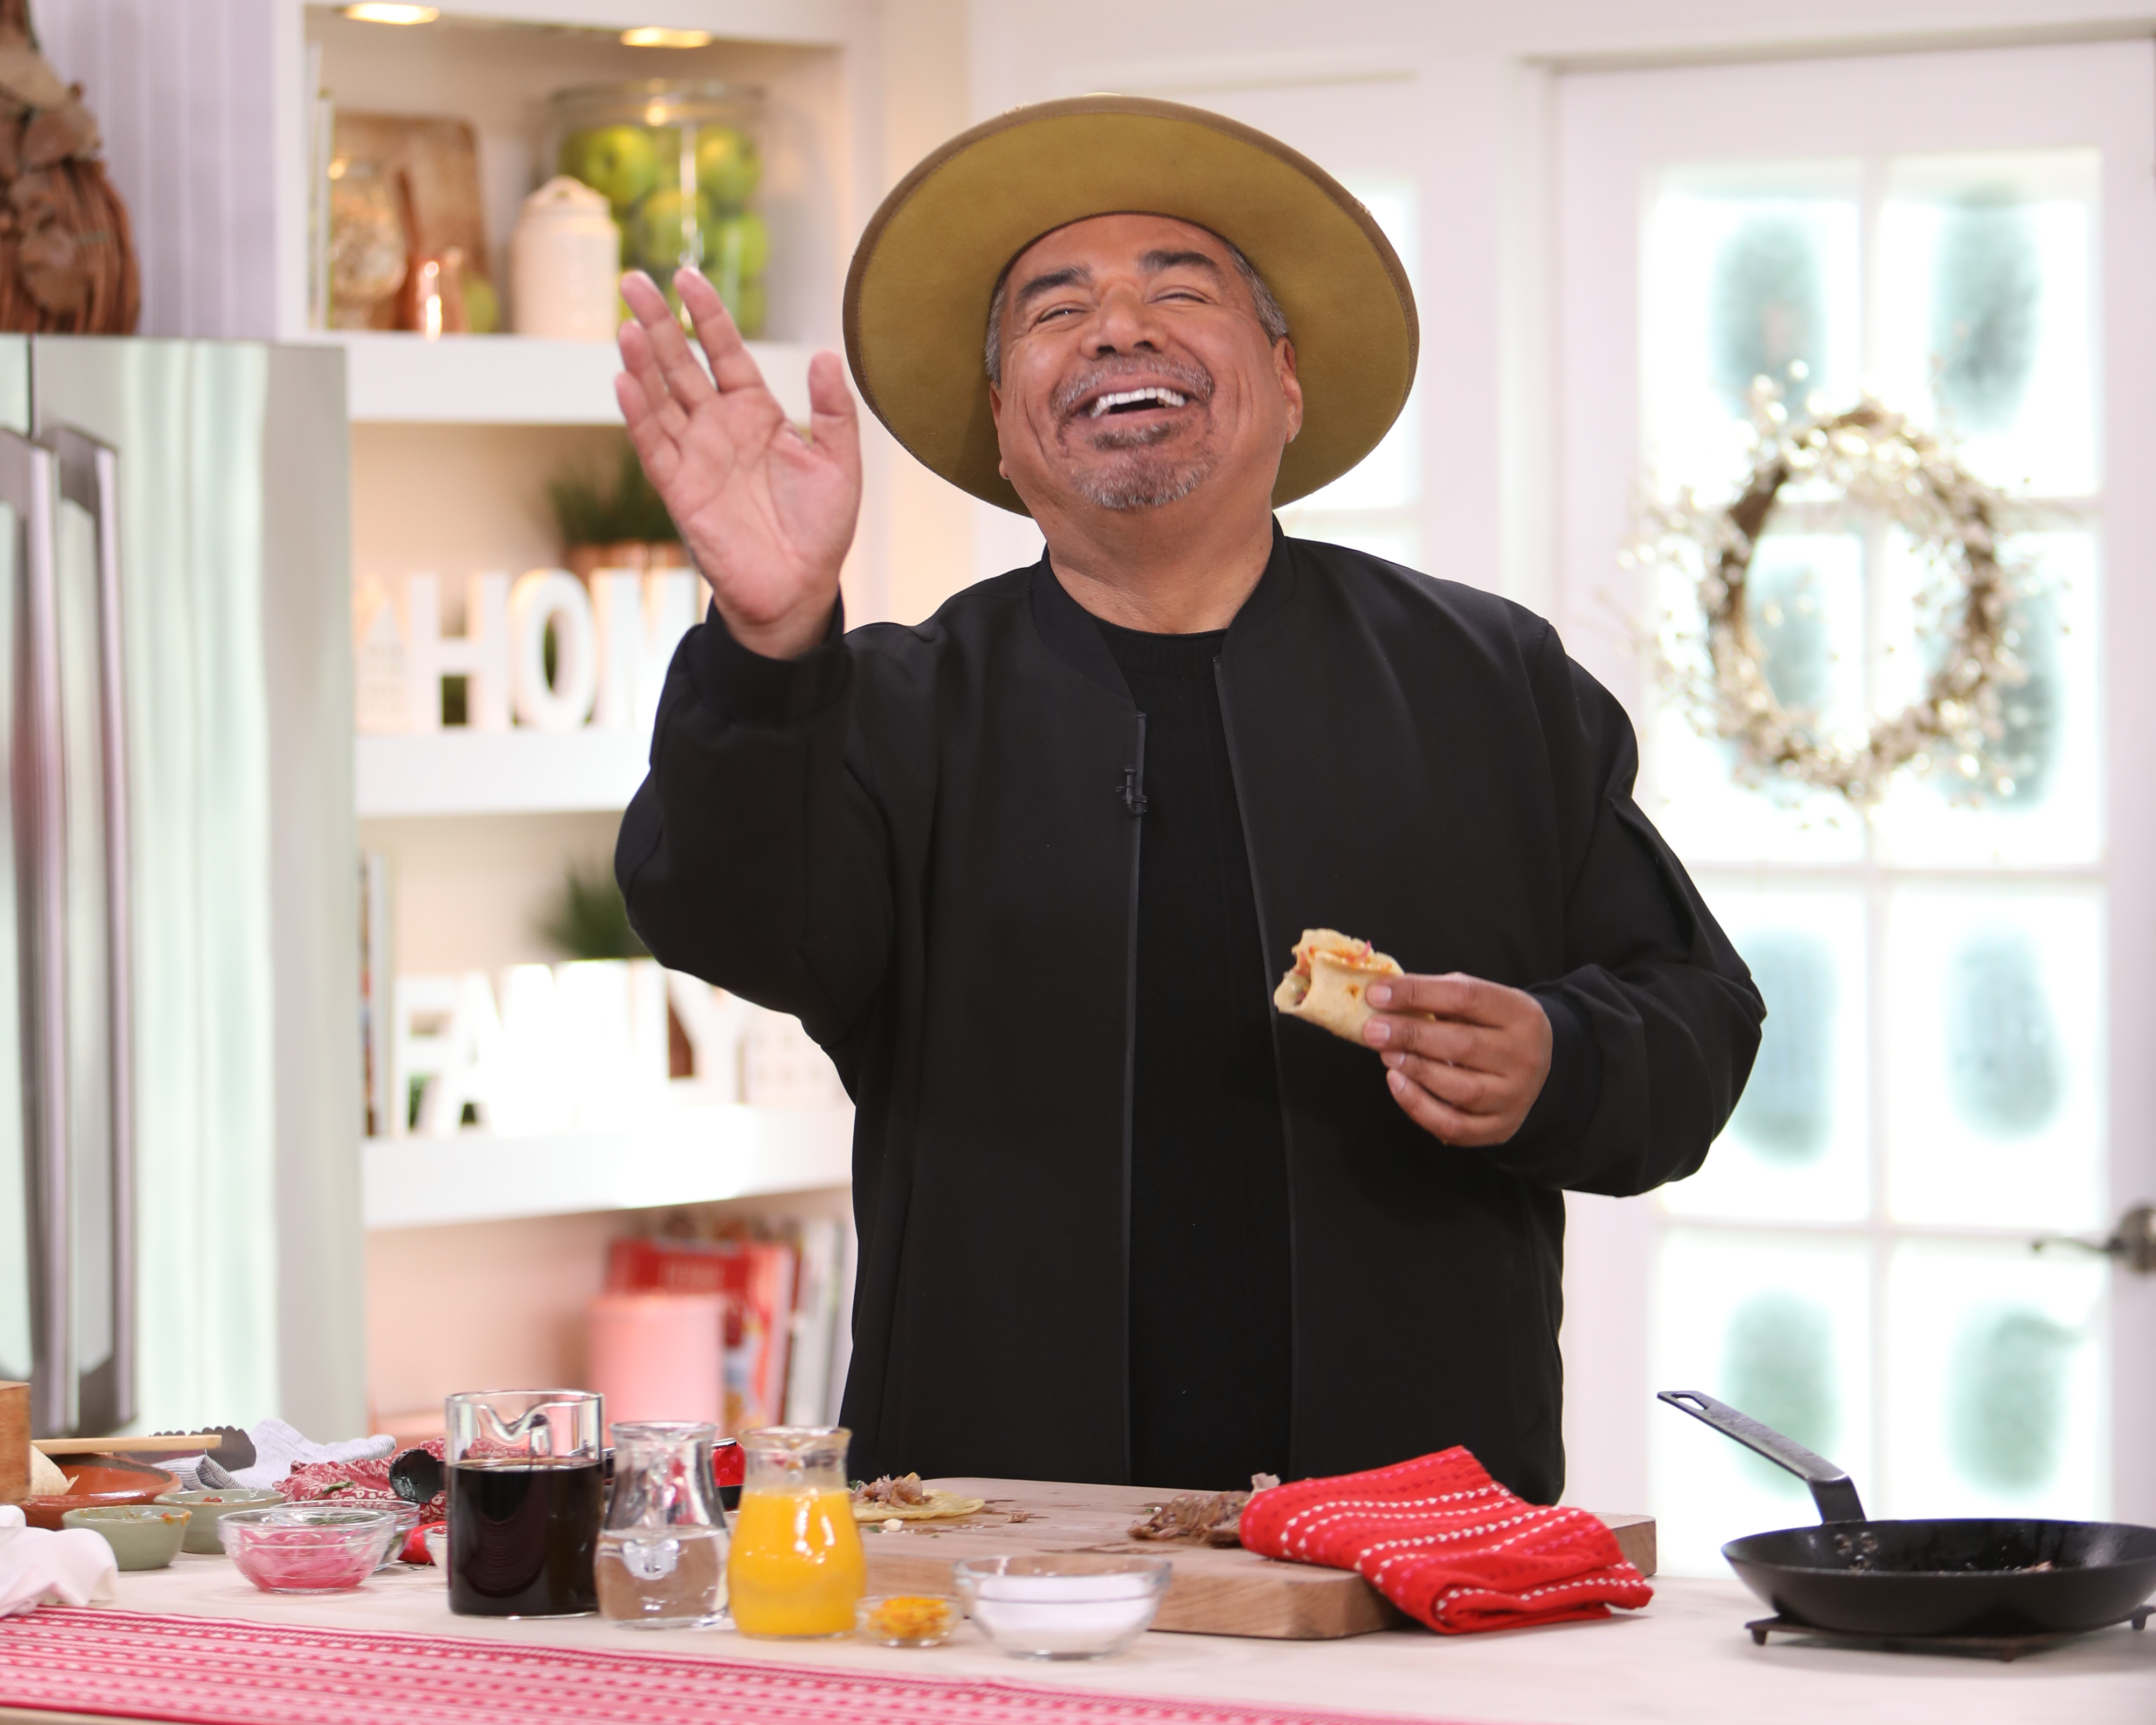 Comedian / actor George Lopez visits Hallmark Channel's "Home & Family" at Universal Studios Hollywood on February 3, 2020 in Universal City, California. | Source: Getty Images